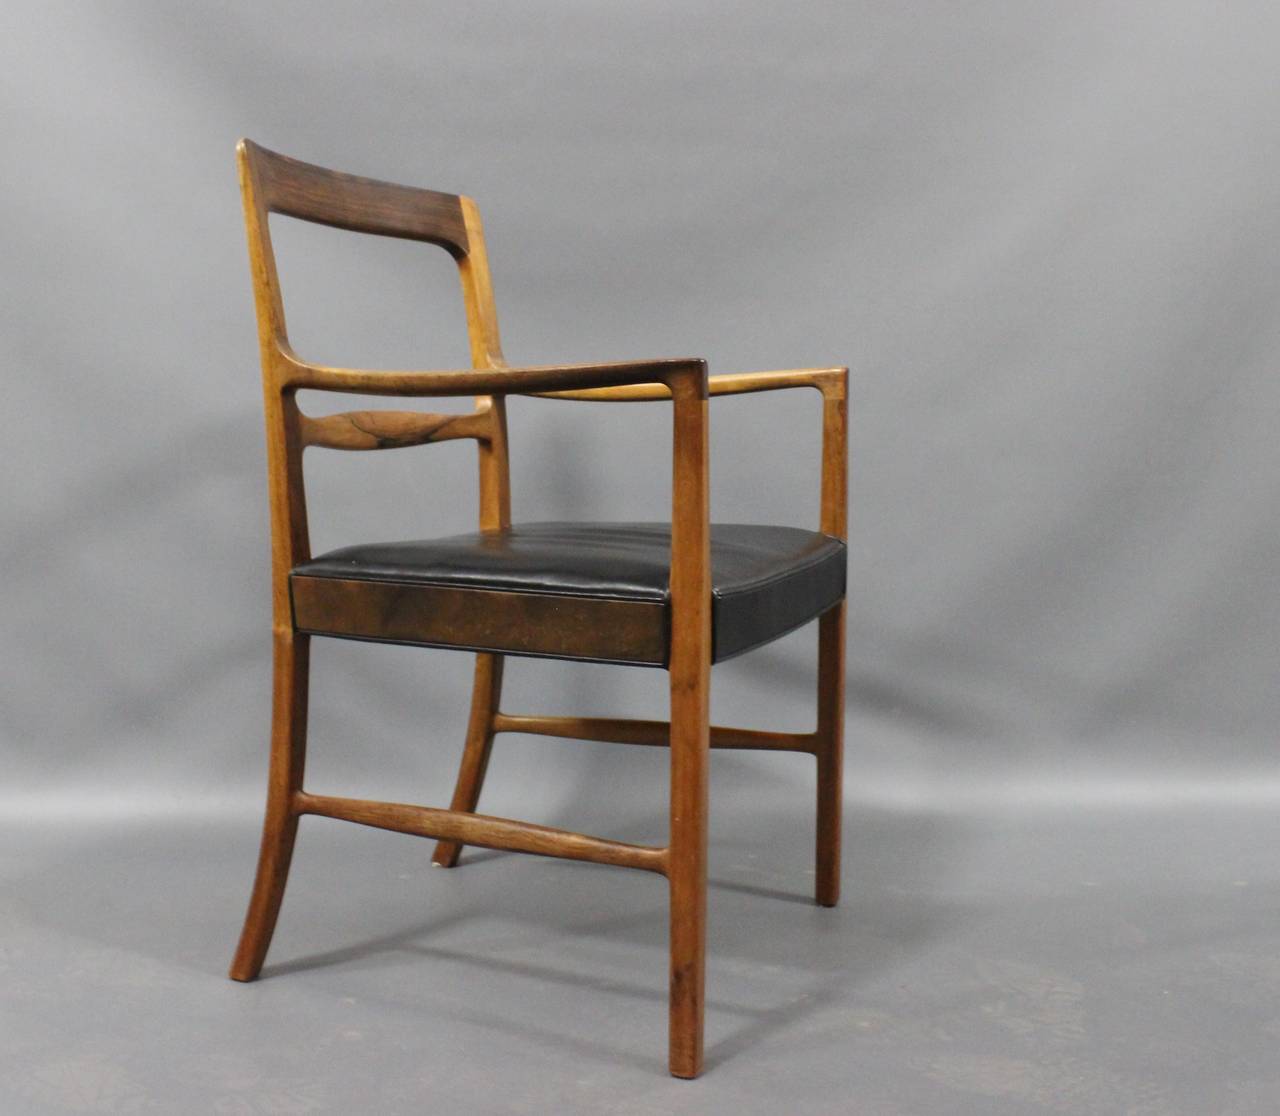 Leather Ole Wanscher Armchair, c. 1954 - 1969 in Rosewood